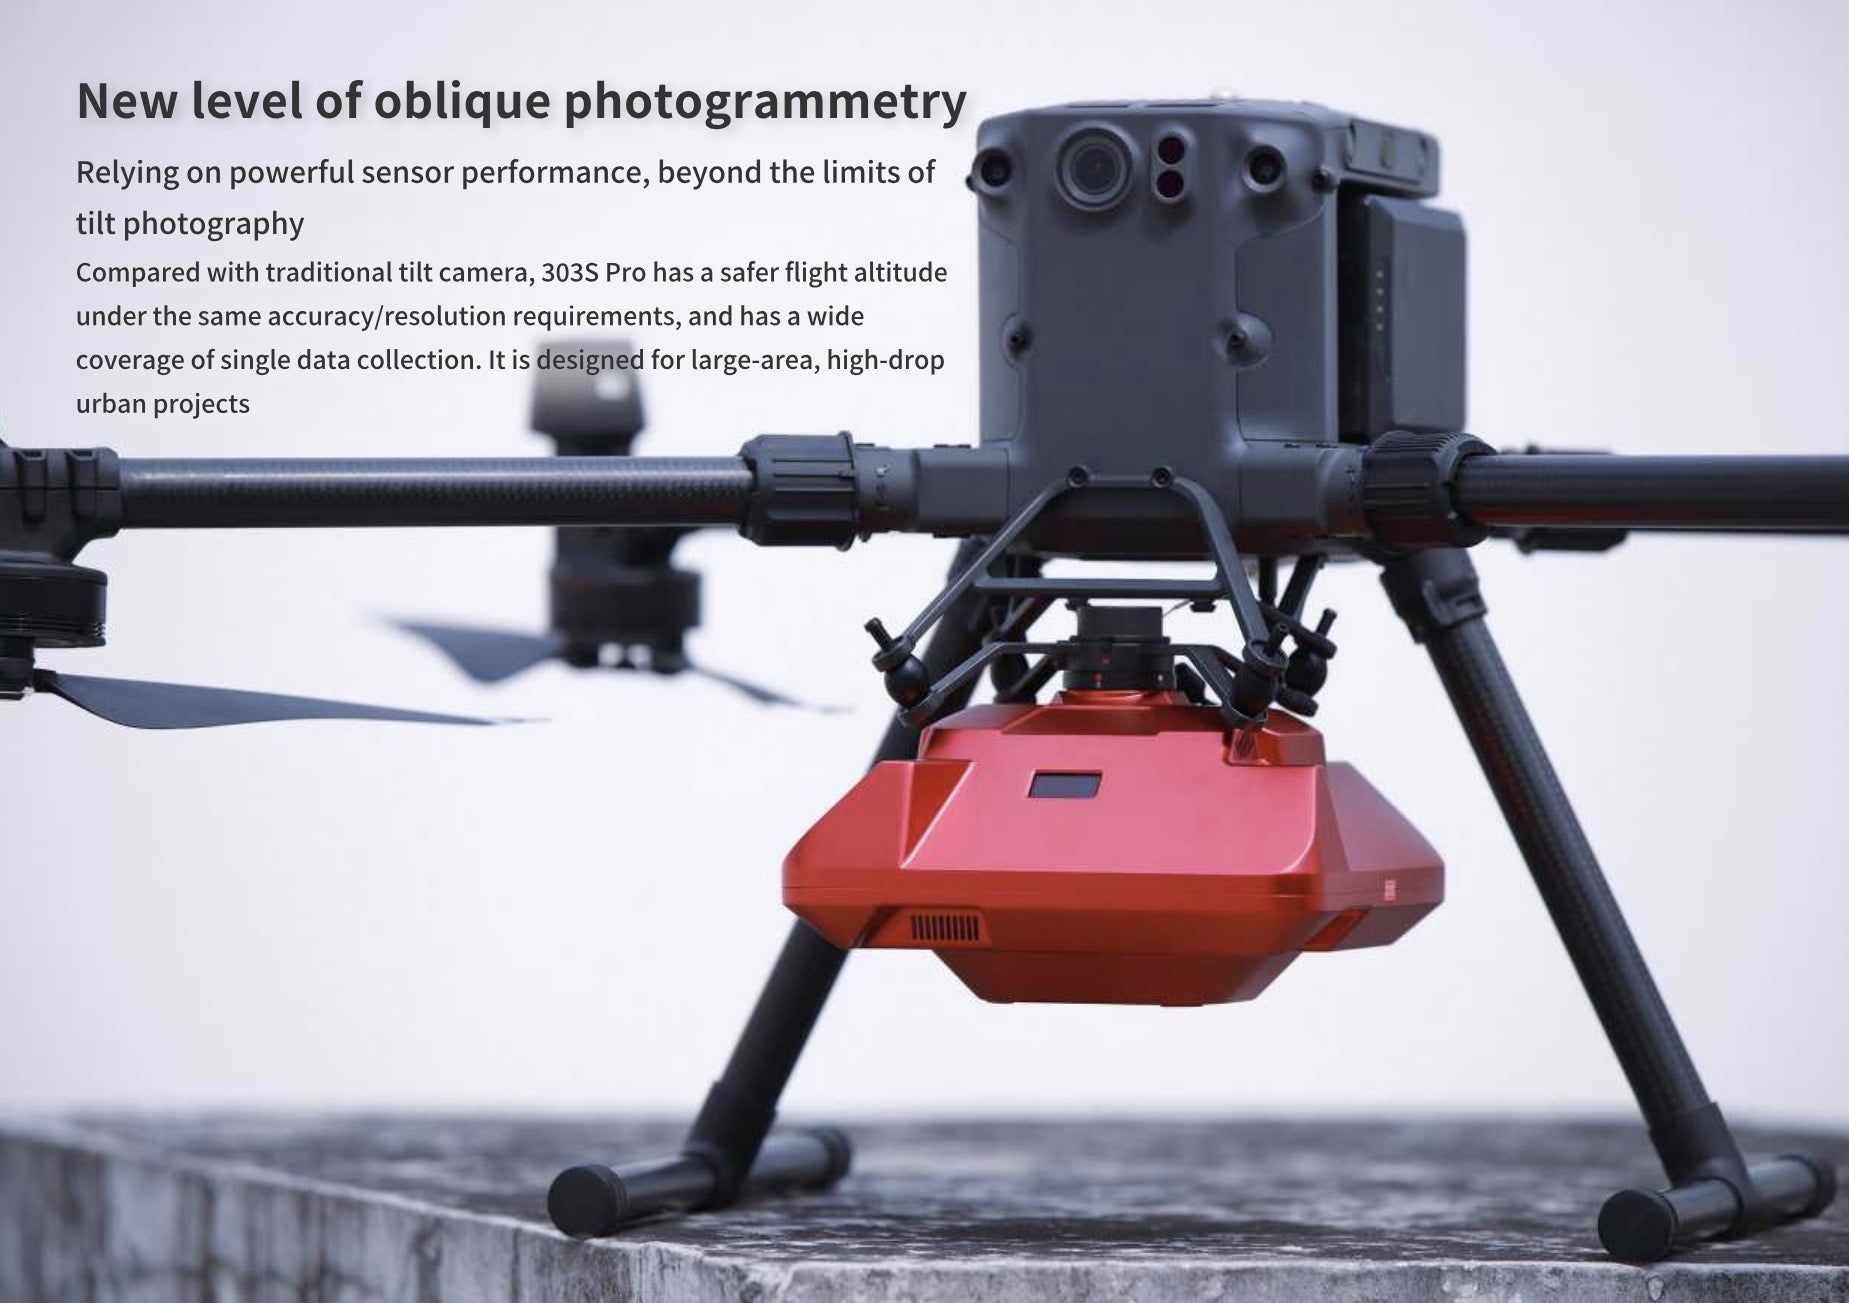 SHARE 303S Pro V2, SHARE 303S Pro camera captures high-resolution photogrammetry with exceptional sensor performance and safe flight altitude.